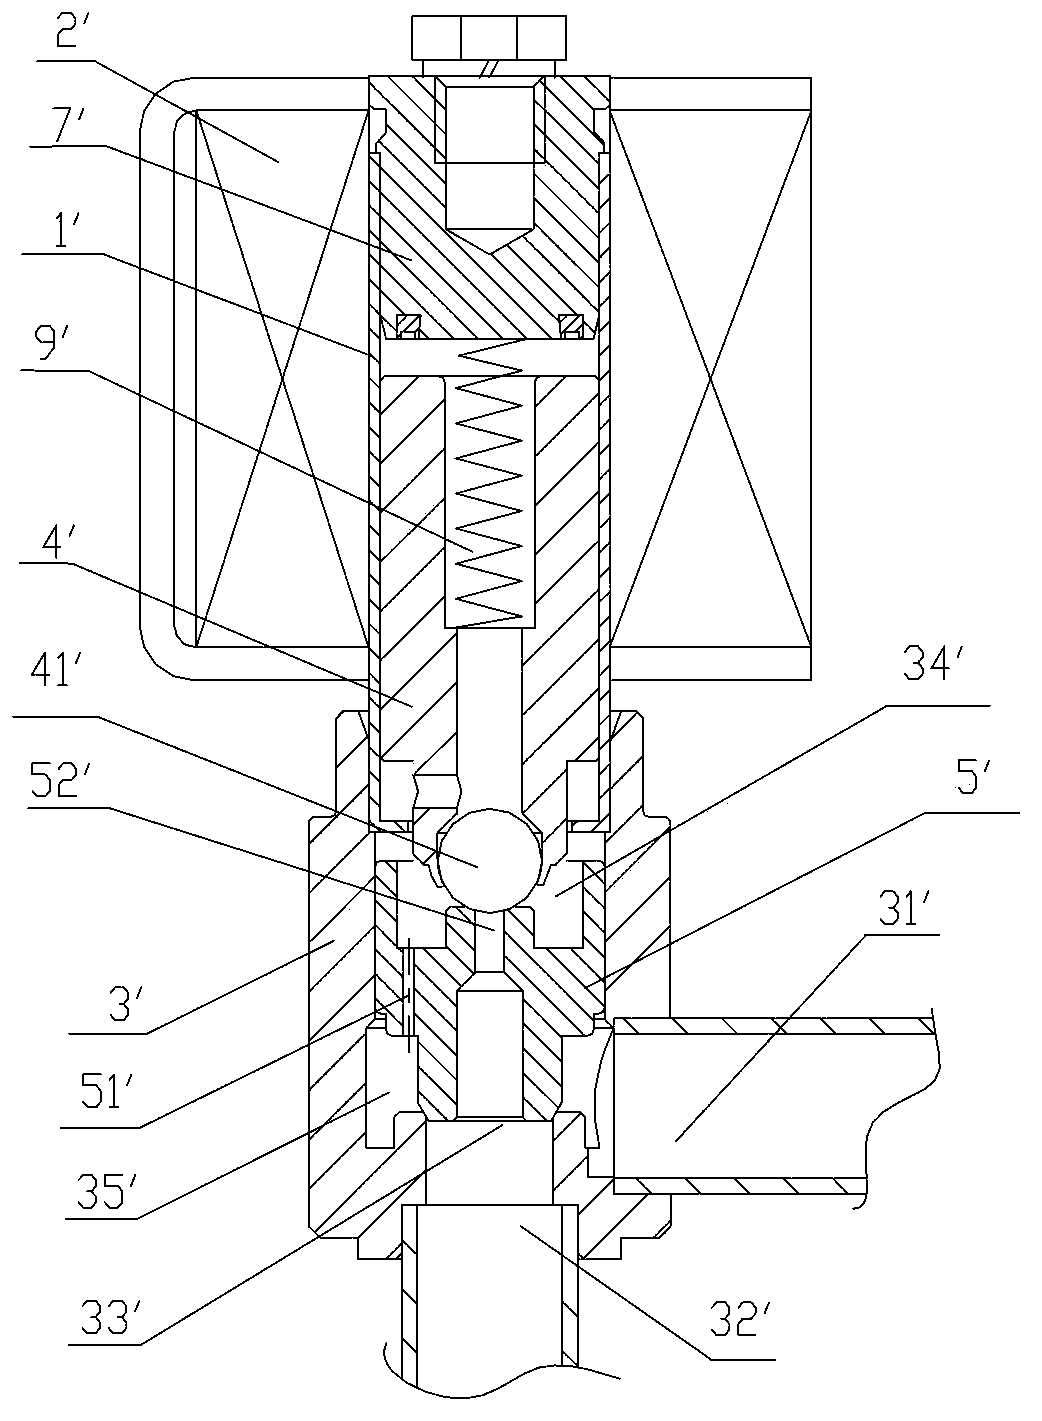 Pilot-operated electromagnetic valve and assembling method thereof